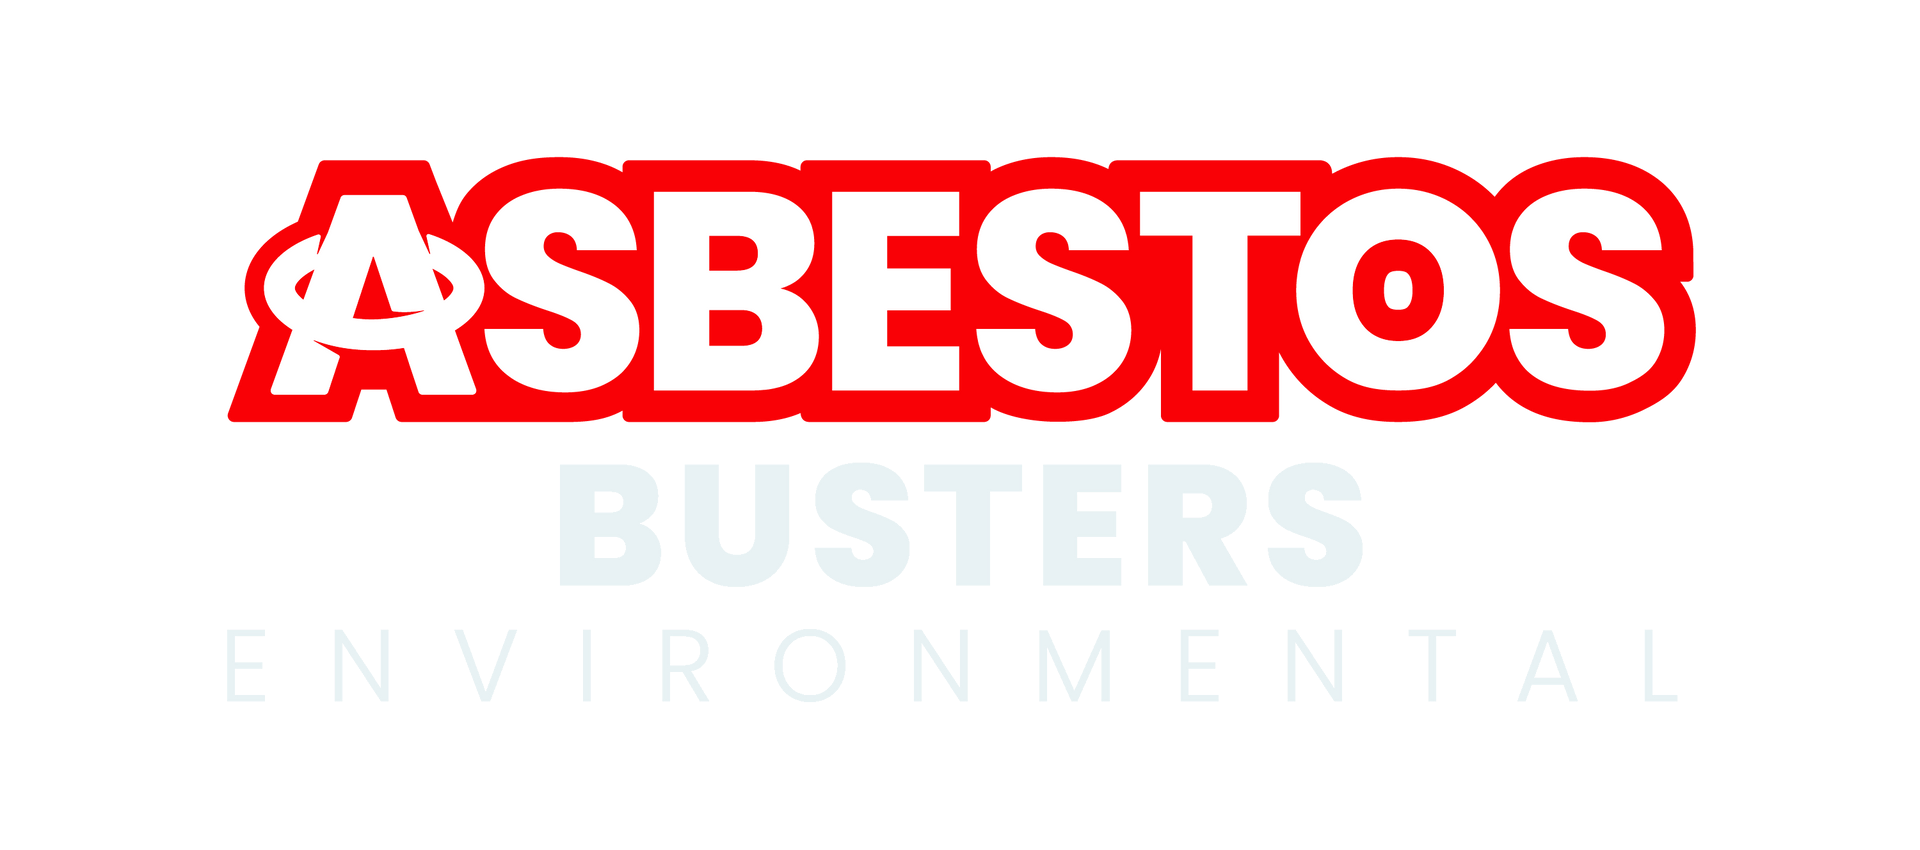 The logo for asbestos busters environmental is red and black.